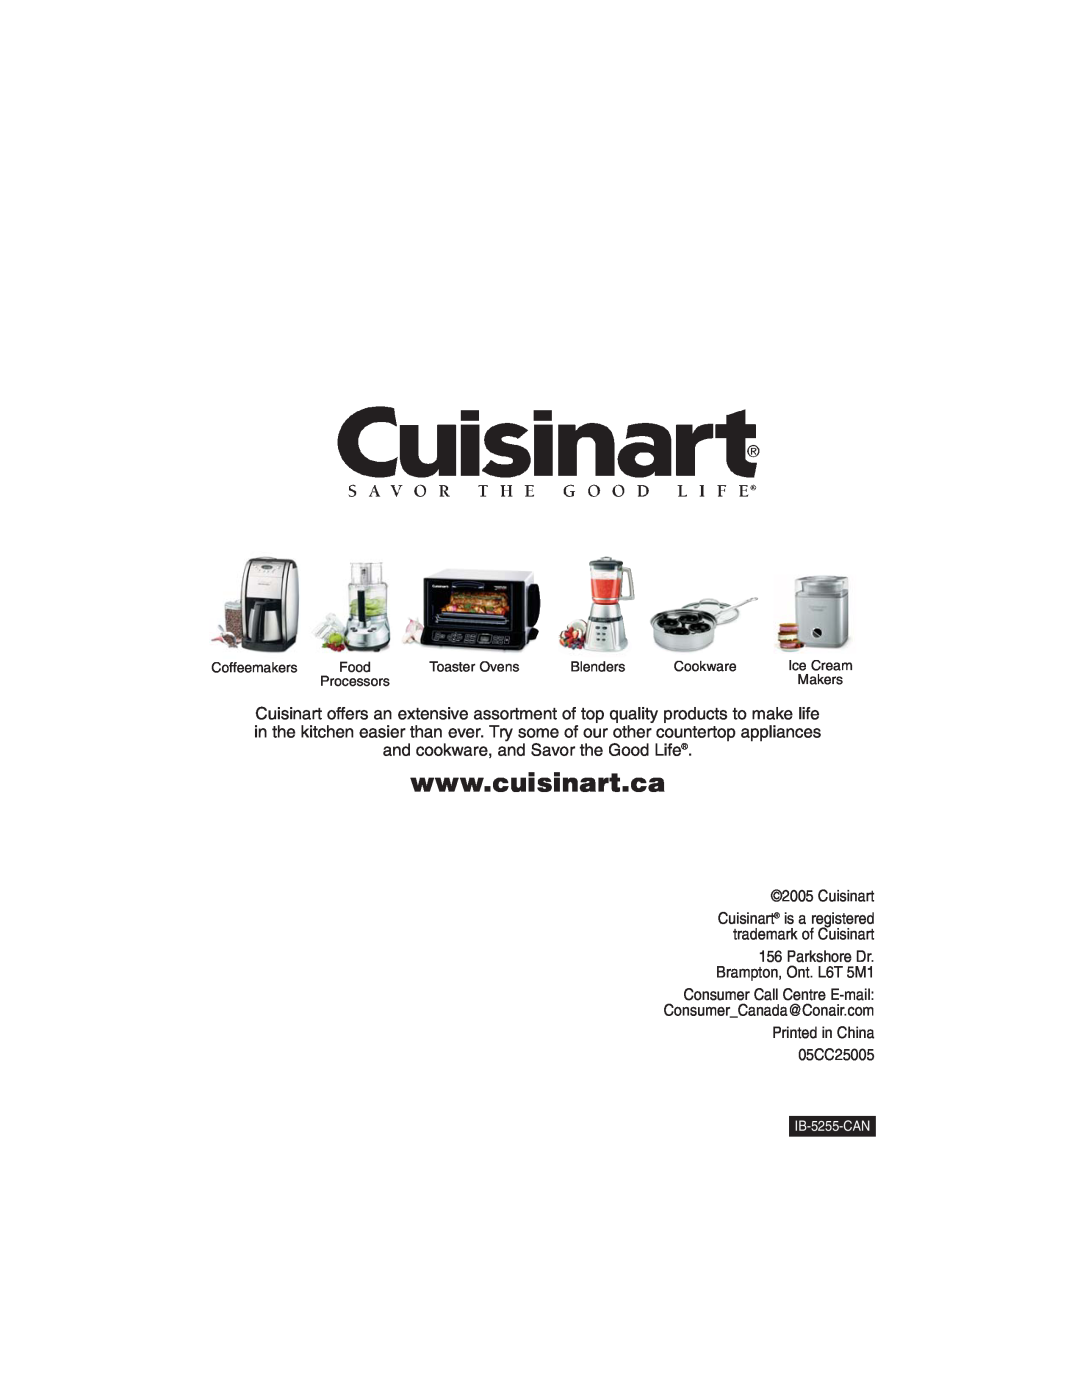 Cuisinart DCC-1400C manual IB-5255-CAN, Cuisinart is a registered trademark of Cuisinart, Printed in China 05CC25005 